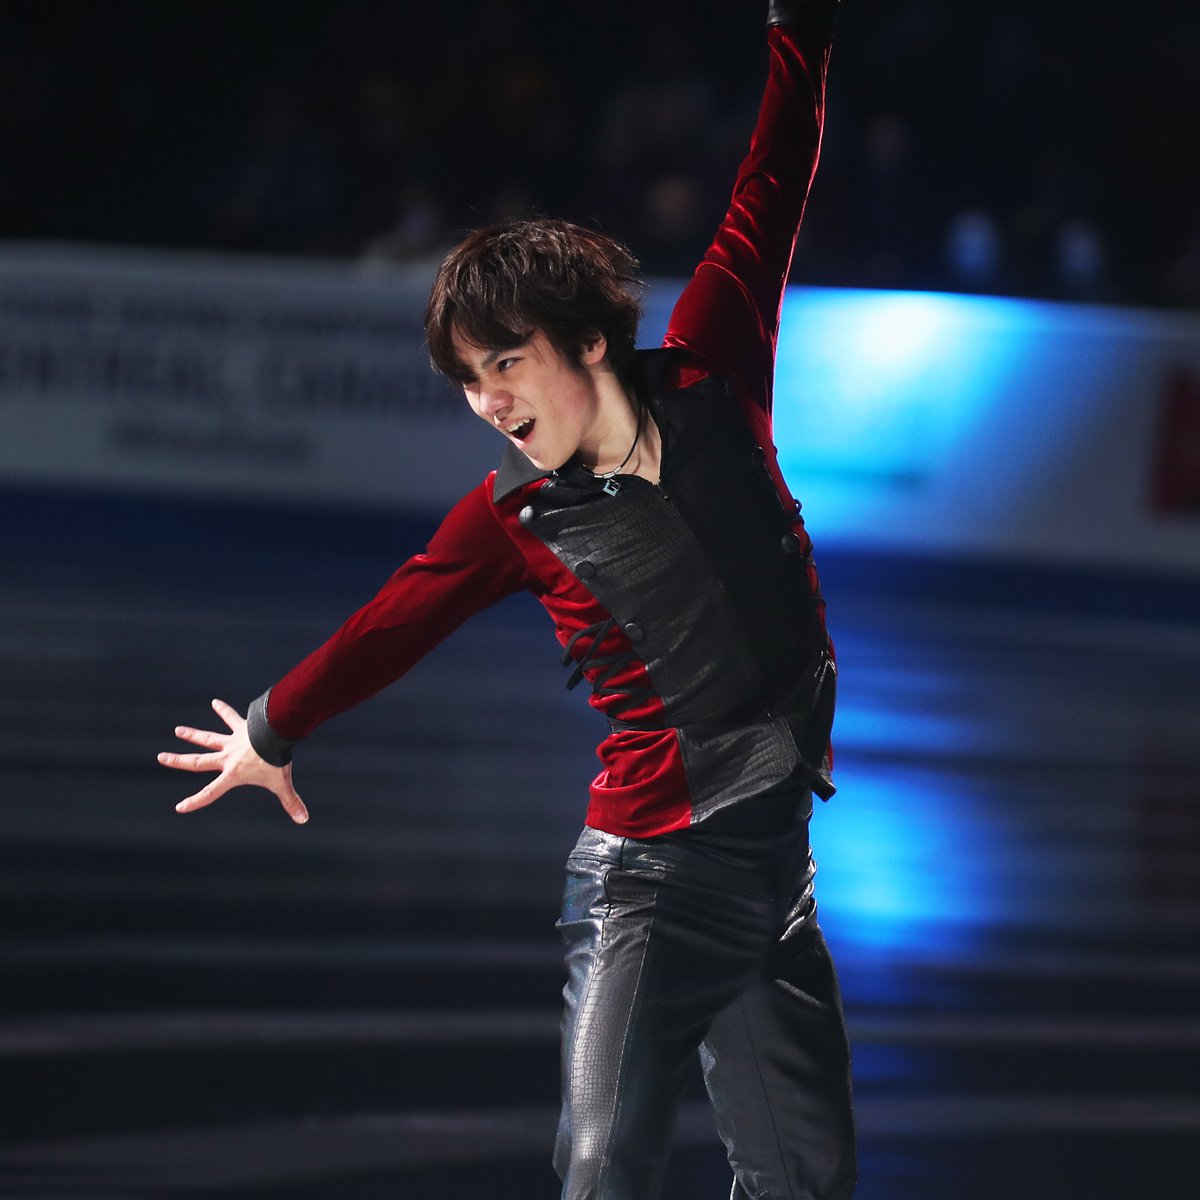 Two-time #WorldFigure champion and #PyeongChang2018 and #Beijing2022 Olympic medallist Shoma Uno 🇯🇵 has announced his retirement today from competitive skating.

#FigureSkating #フィギュアスケート #宇野昌磨 #ShomaUno